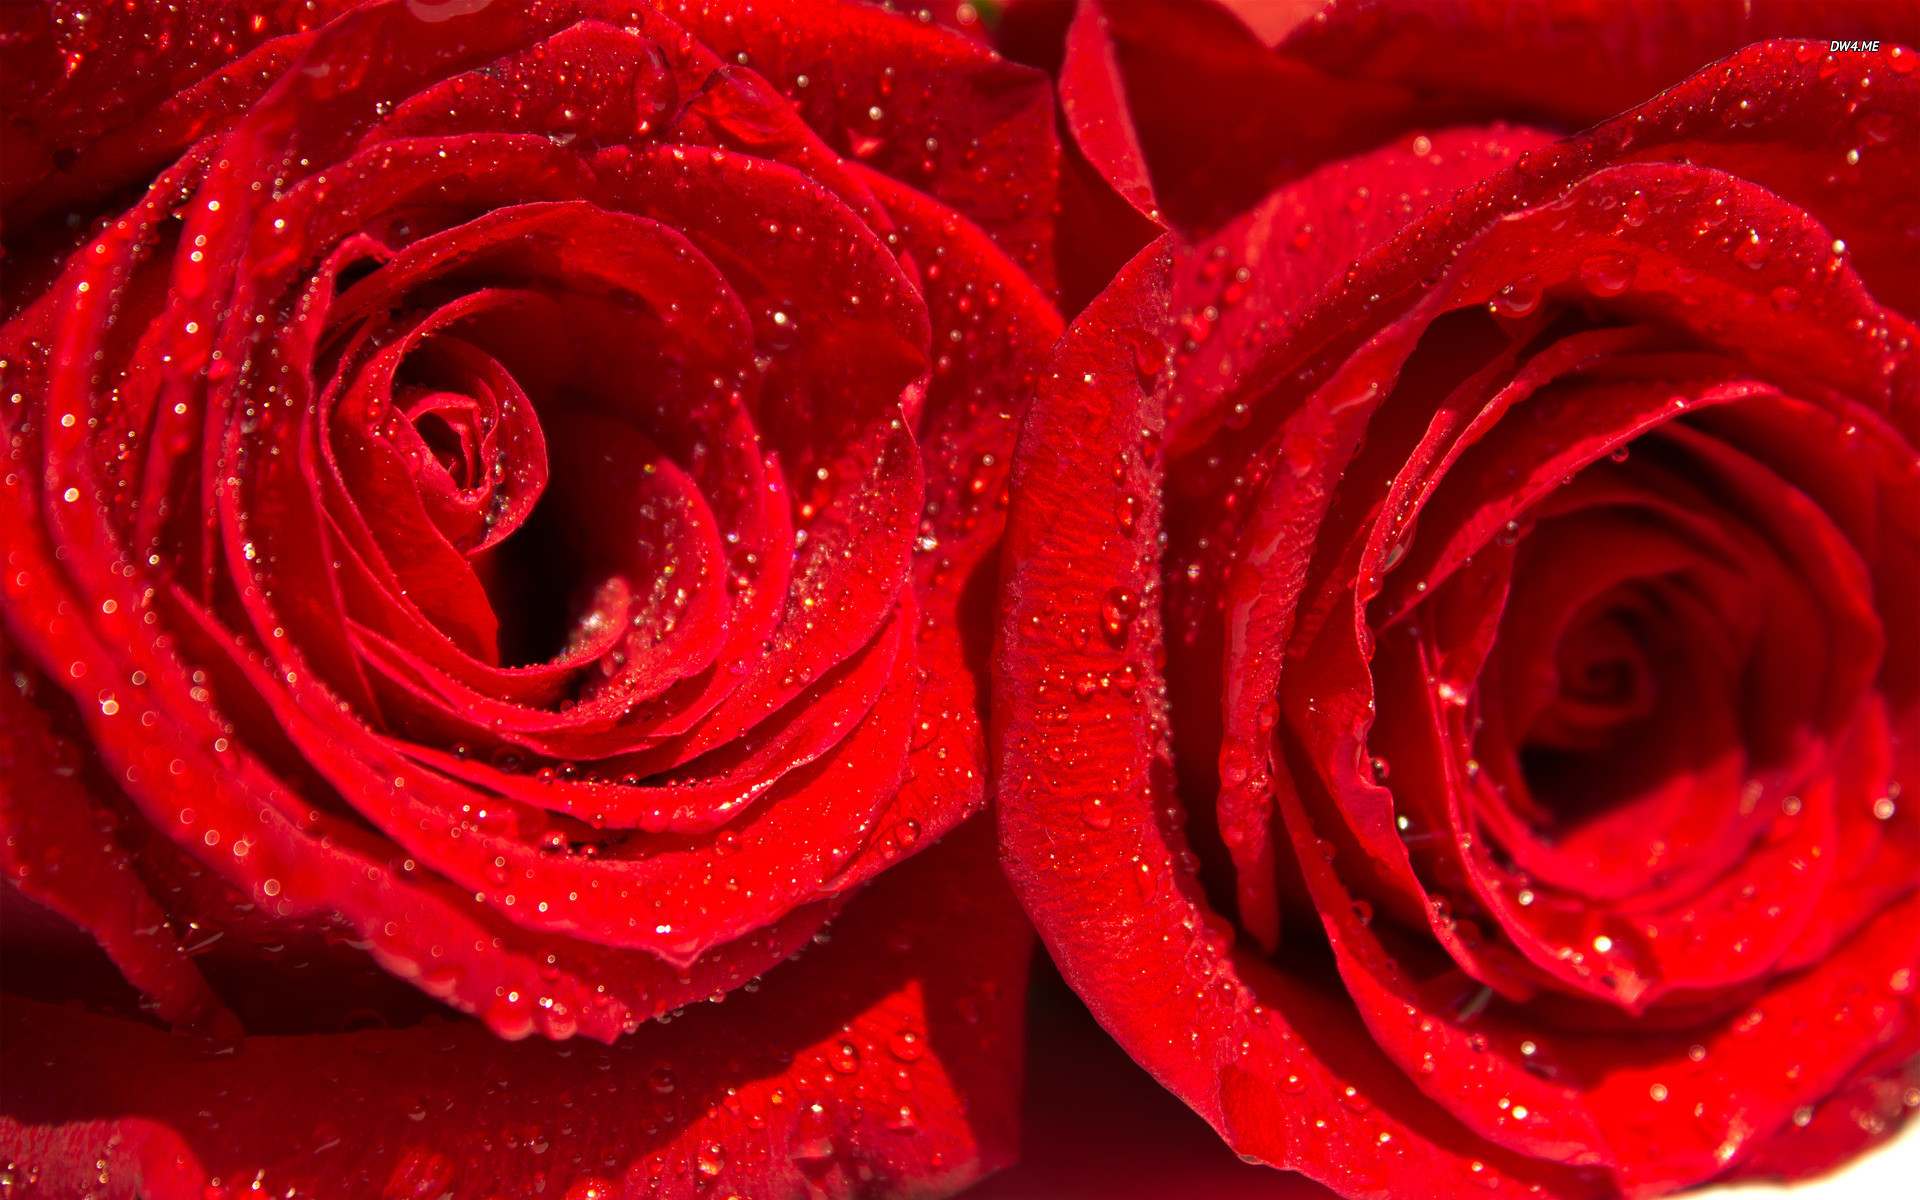 1920x1200 Red Rose With Water Drops Wallpaper 2016Ã1172 Rose With Water Drops  Wallpapers (39